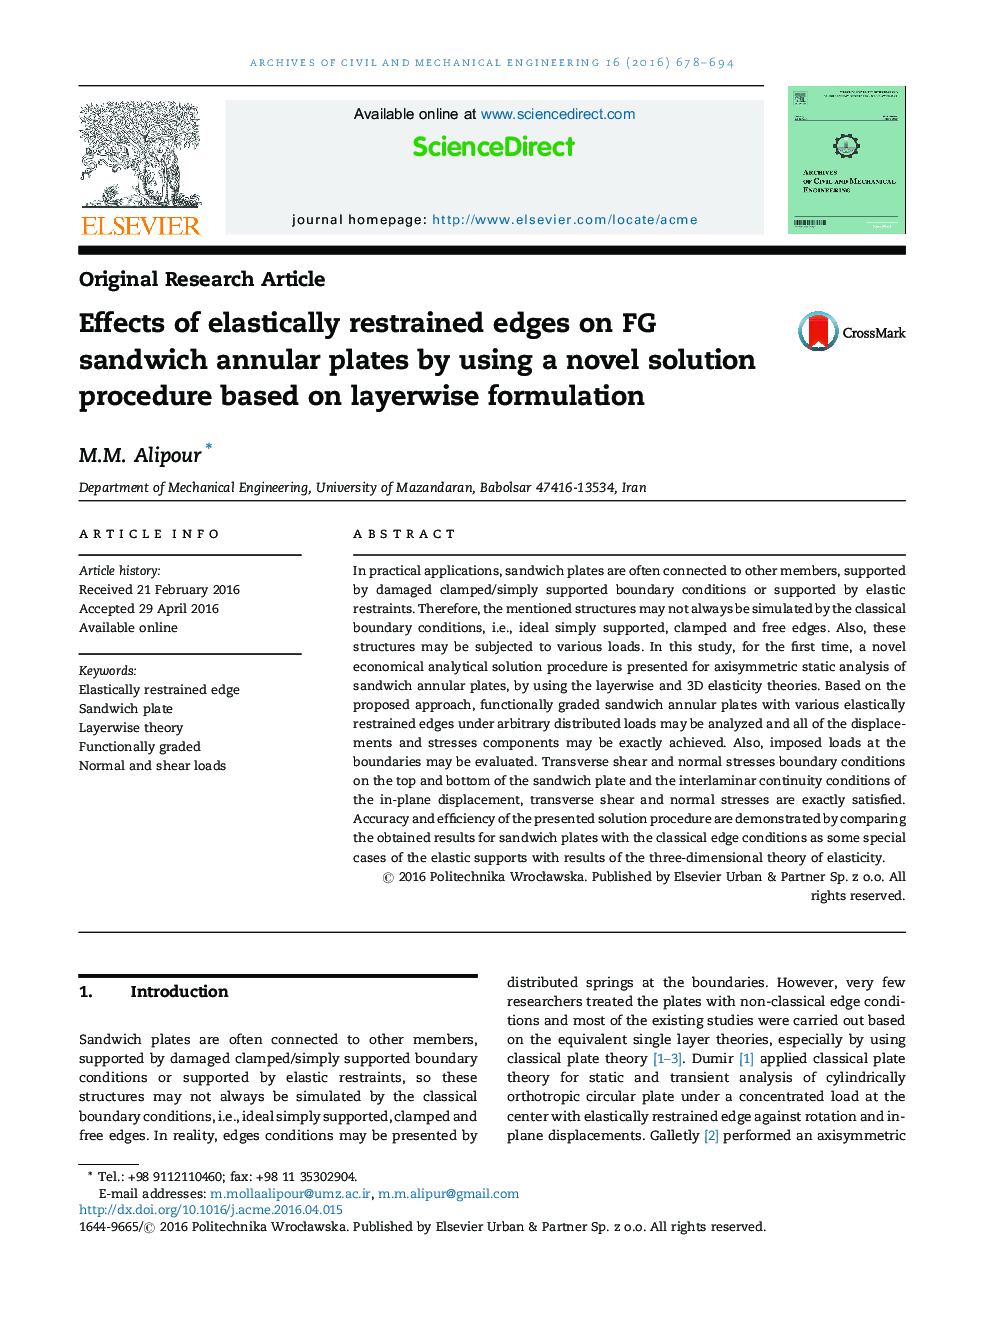 Effects of elastically restrained edges on FG sandwich annular plates by using a novel solution procedure based on layerwise formulation